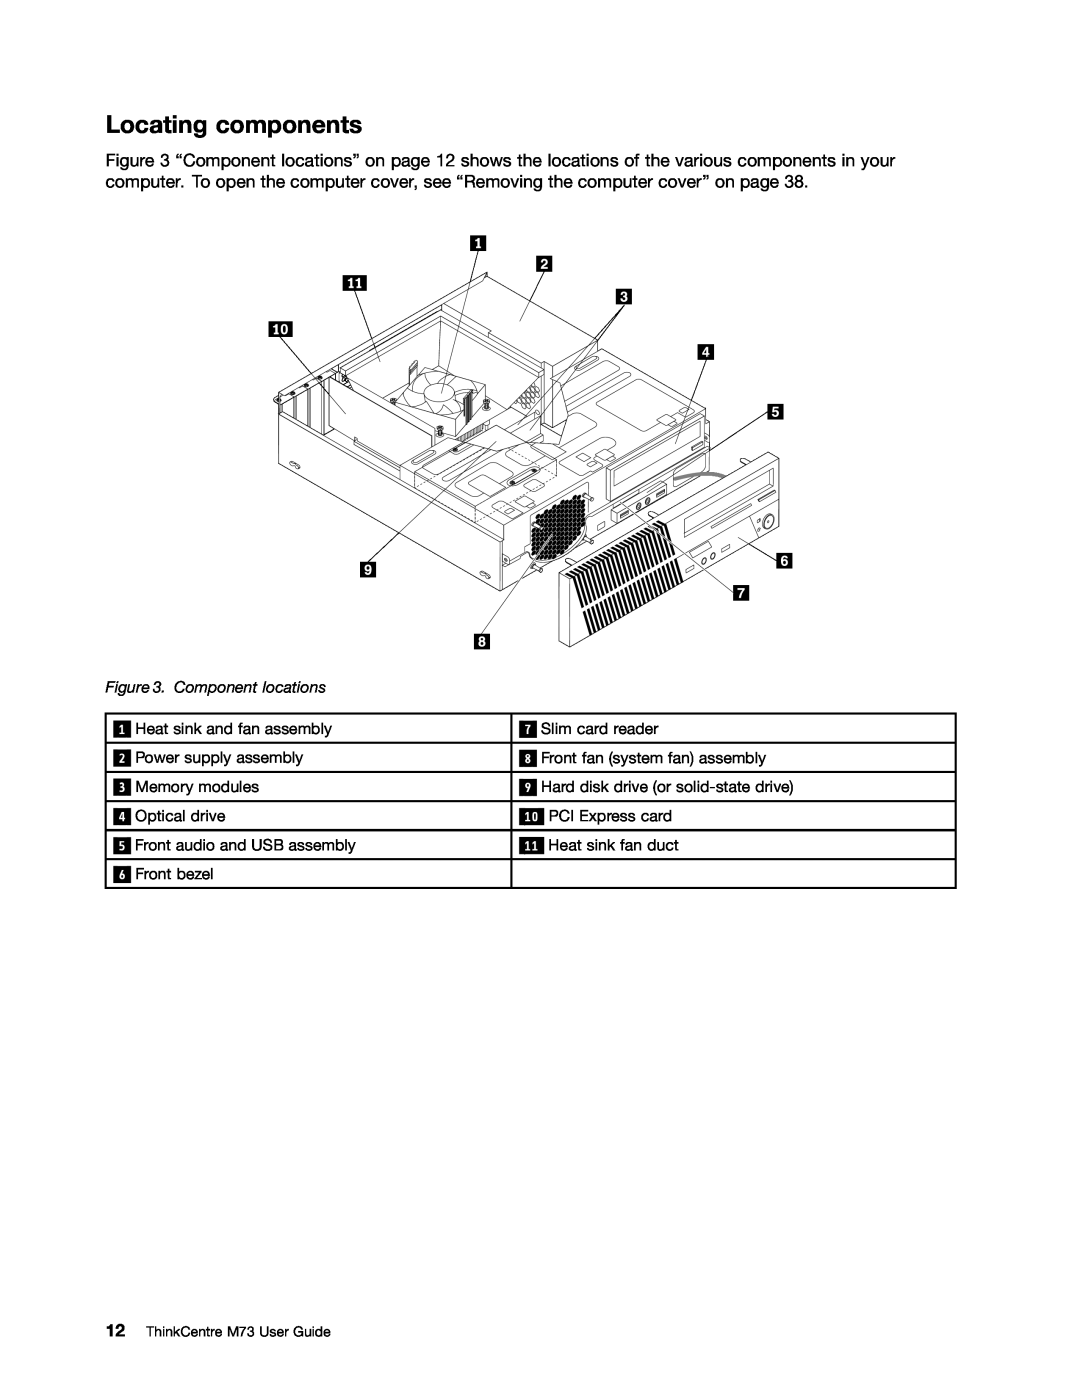 Lenovo M73 manual Locating components, Component locations 